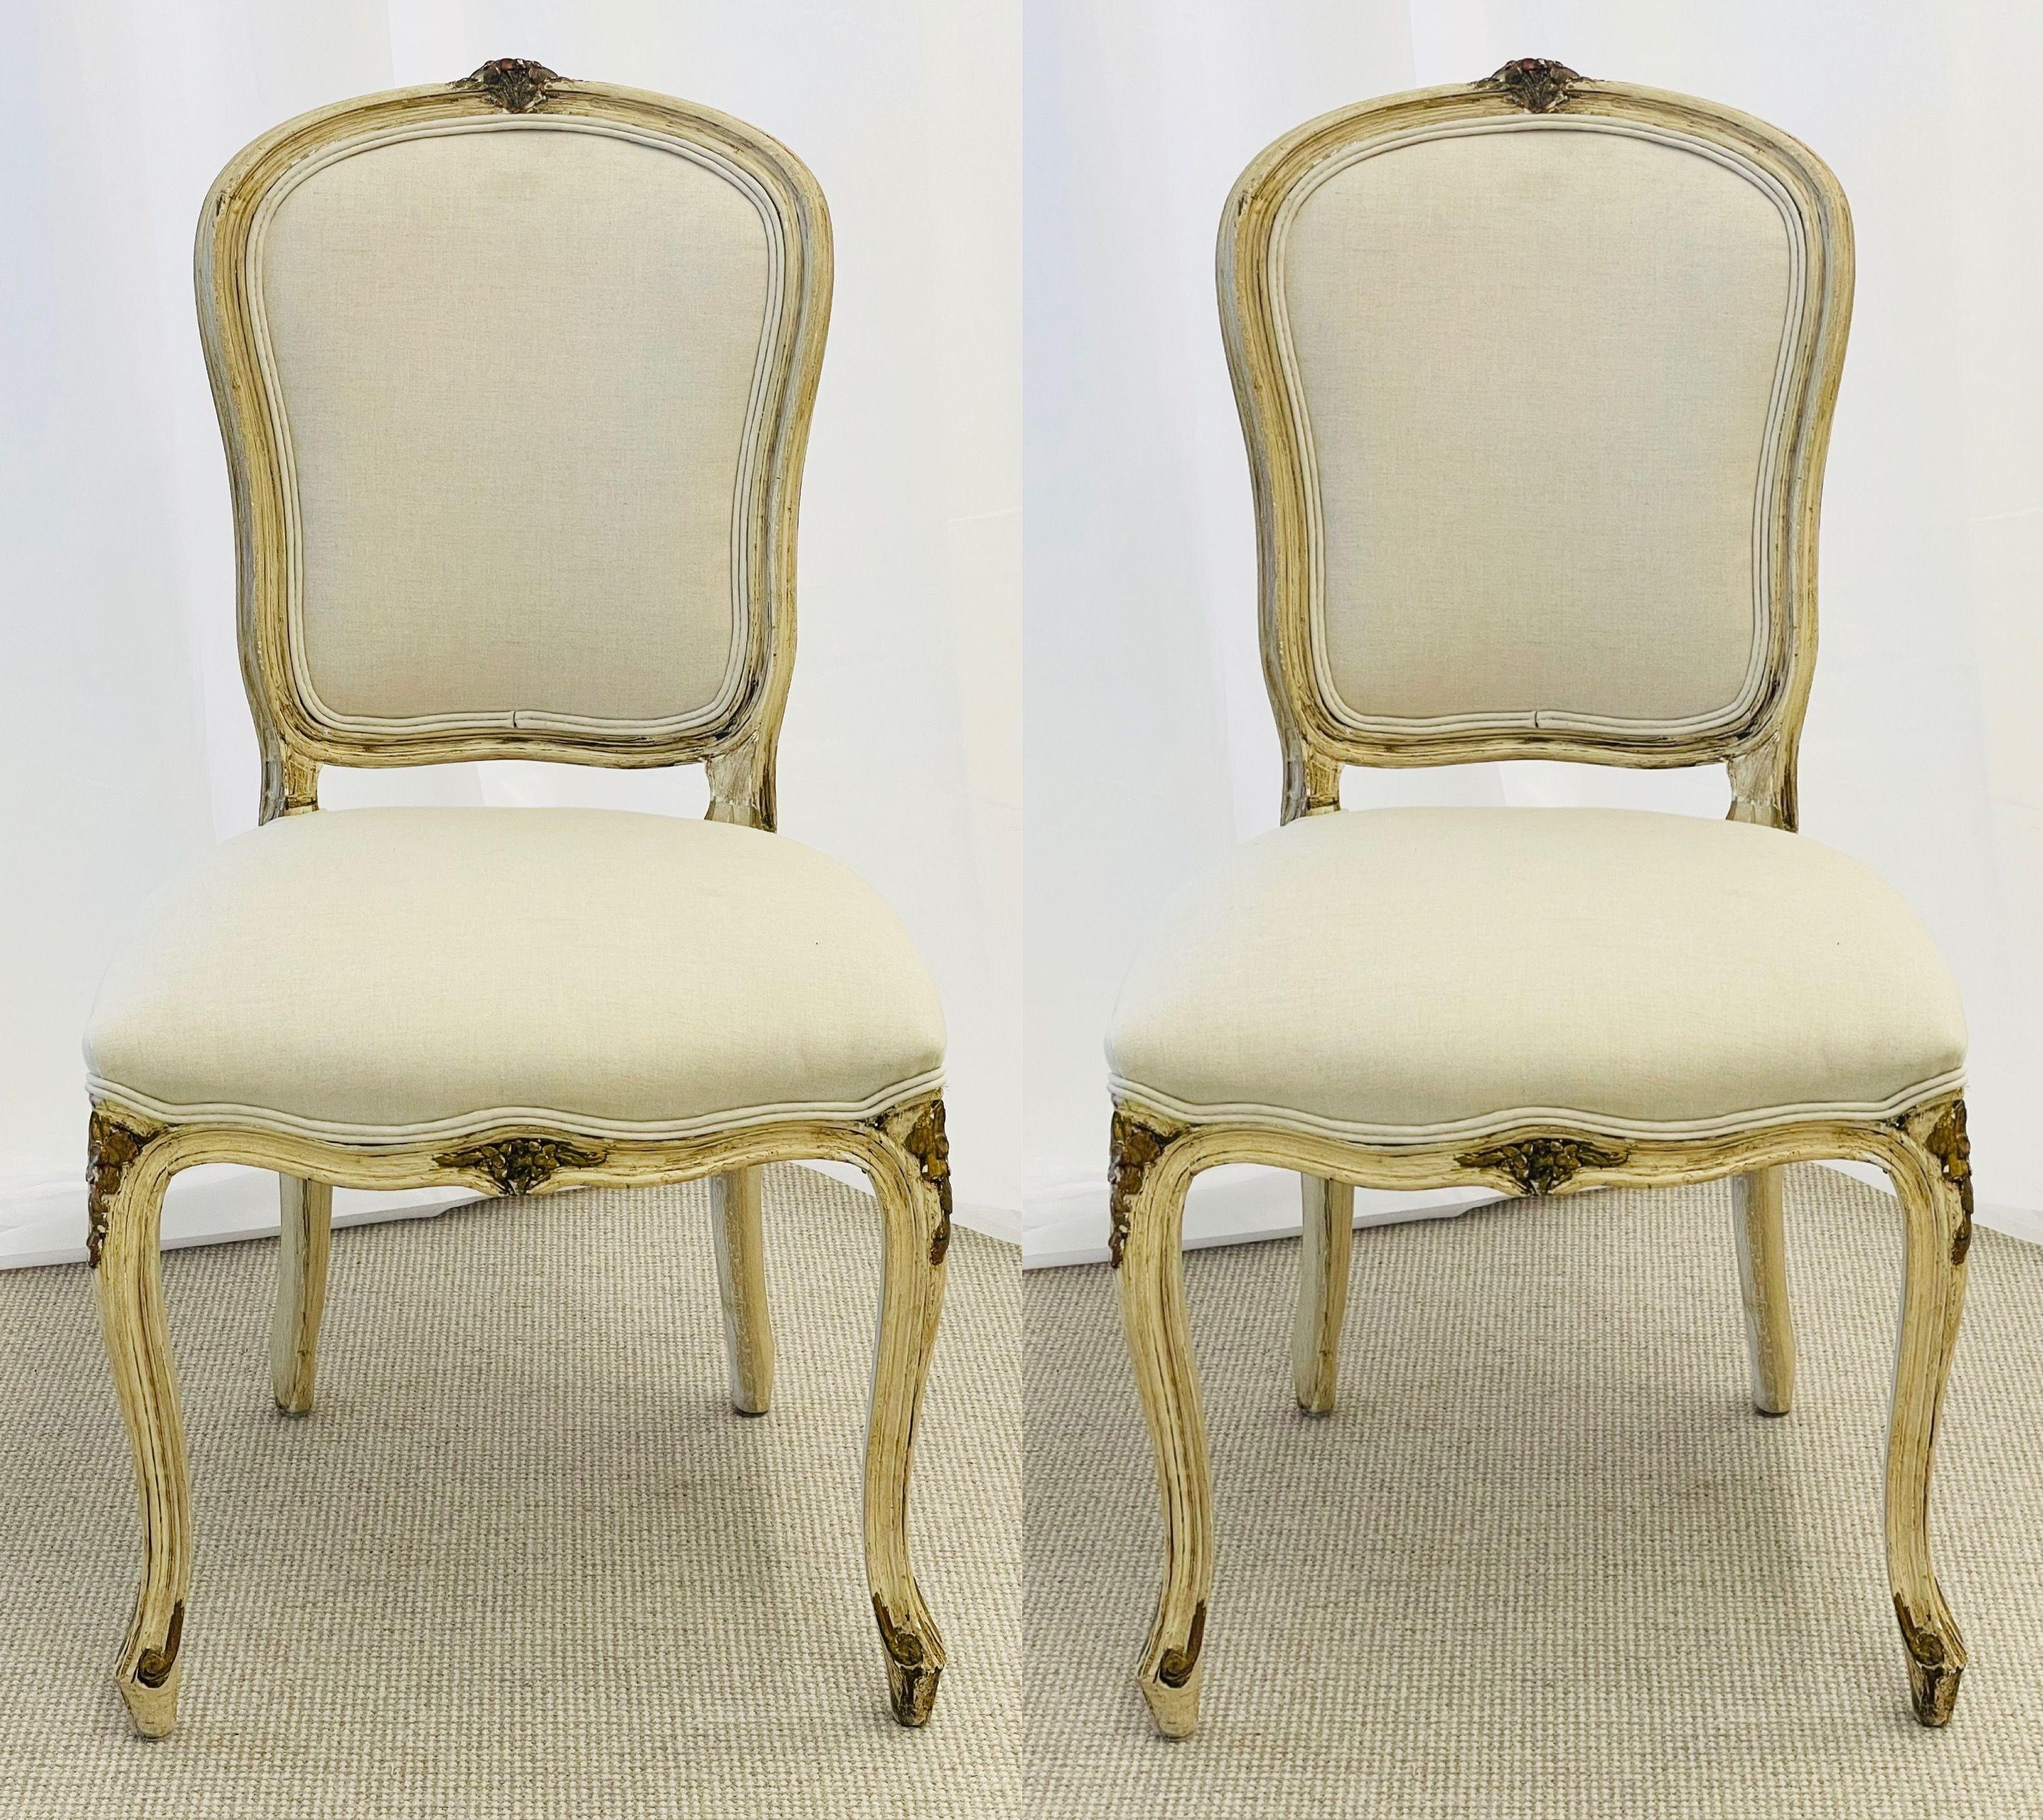 Maison Jansen, Gustavian, Dining Chairs, Ivory Painted Wood, White Fabric, 1940s For Sale 2